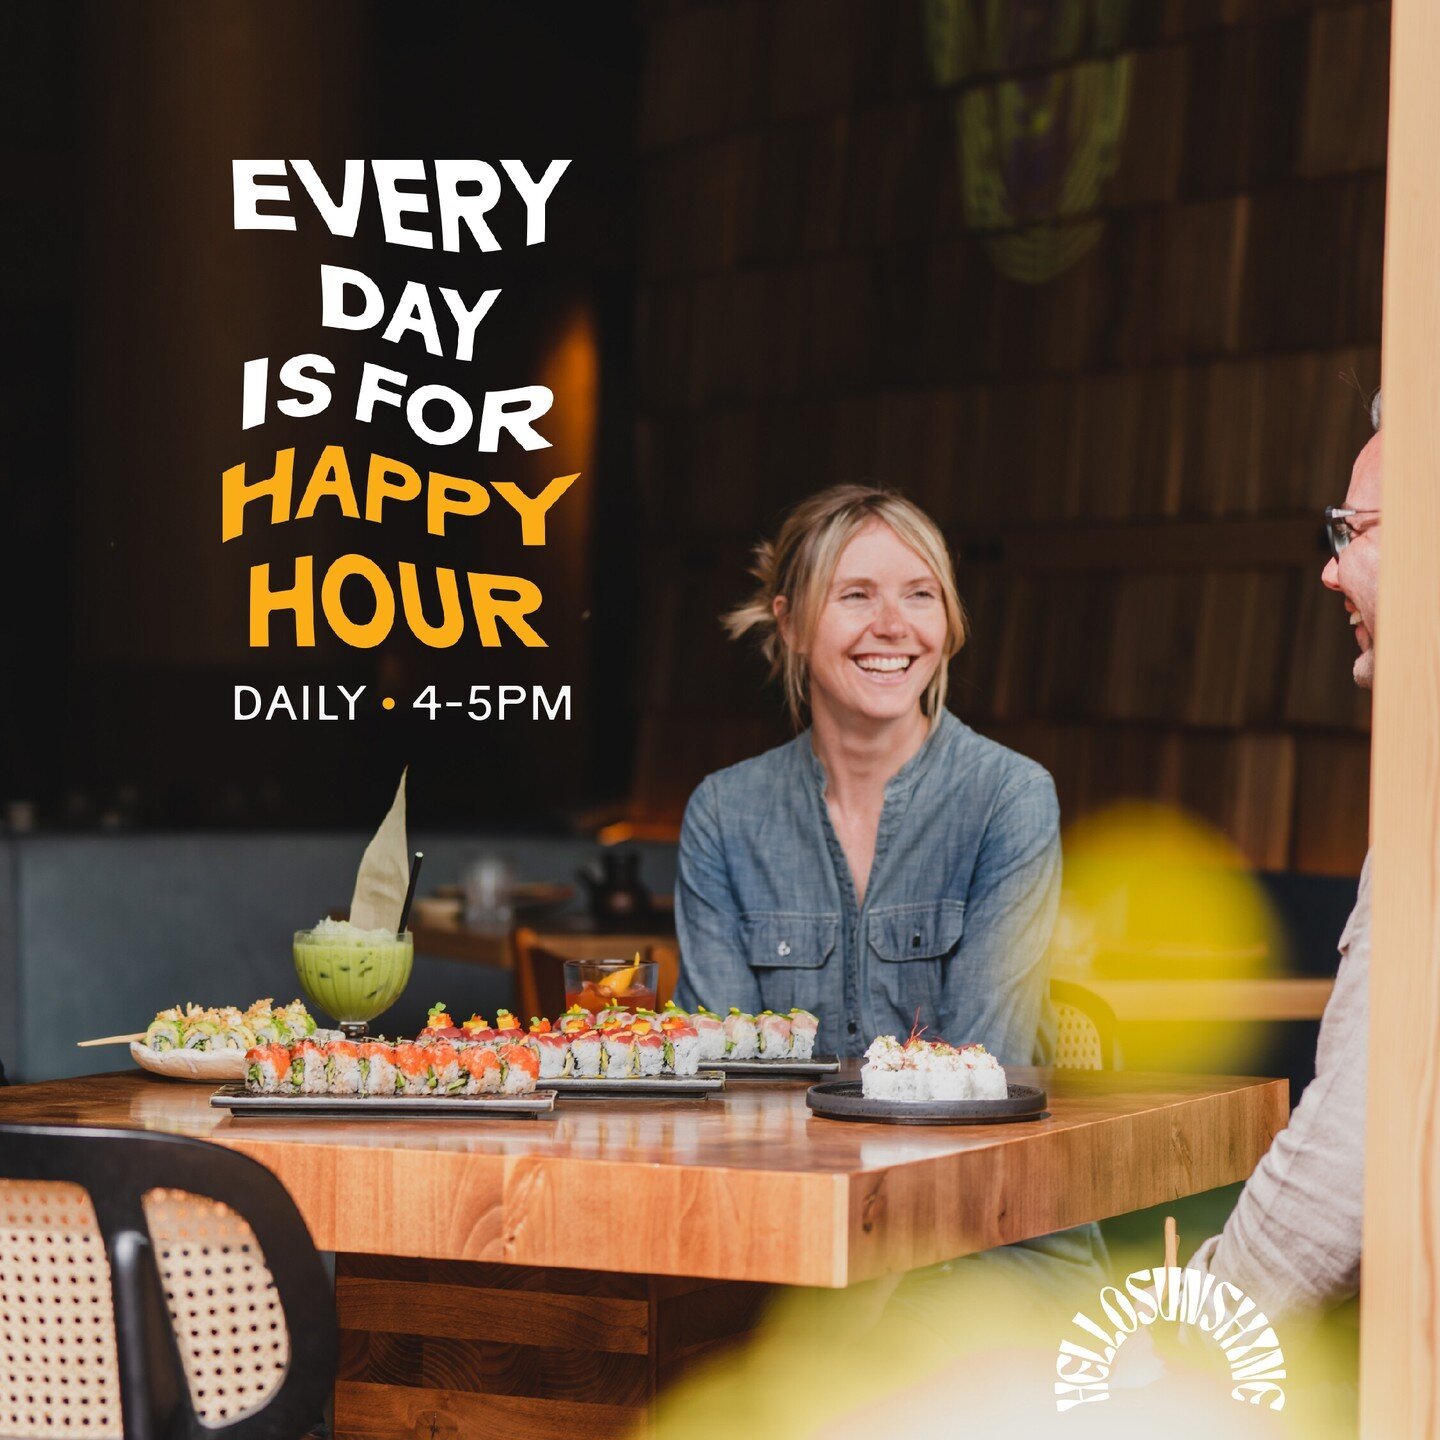 You can&rsquo;t buy happiness&hellip; but you can buy sushi at half price, which is technically the same thing. 😉 Swing by for our happy hour. Daily 4-5pm. 🍣